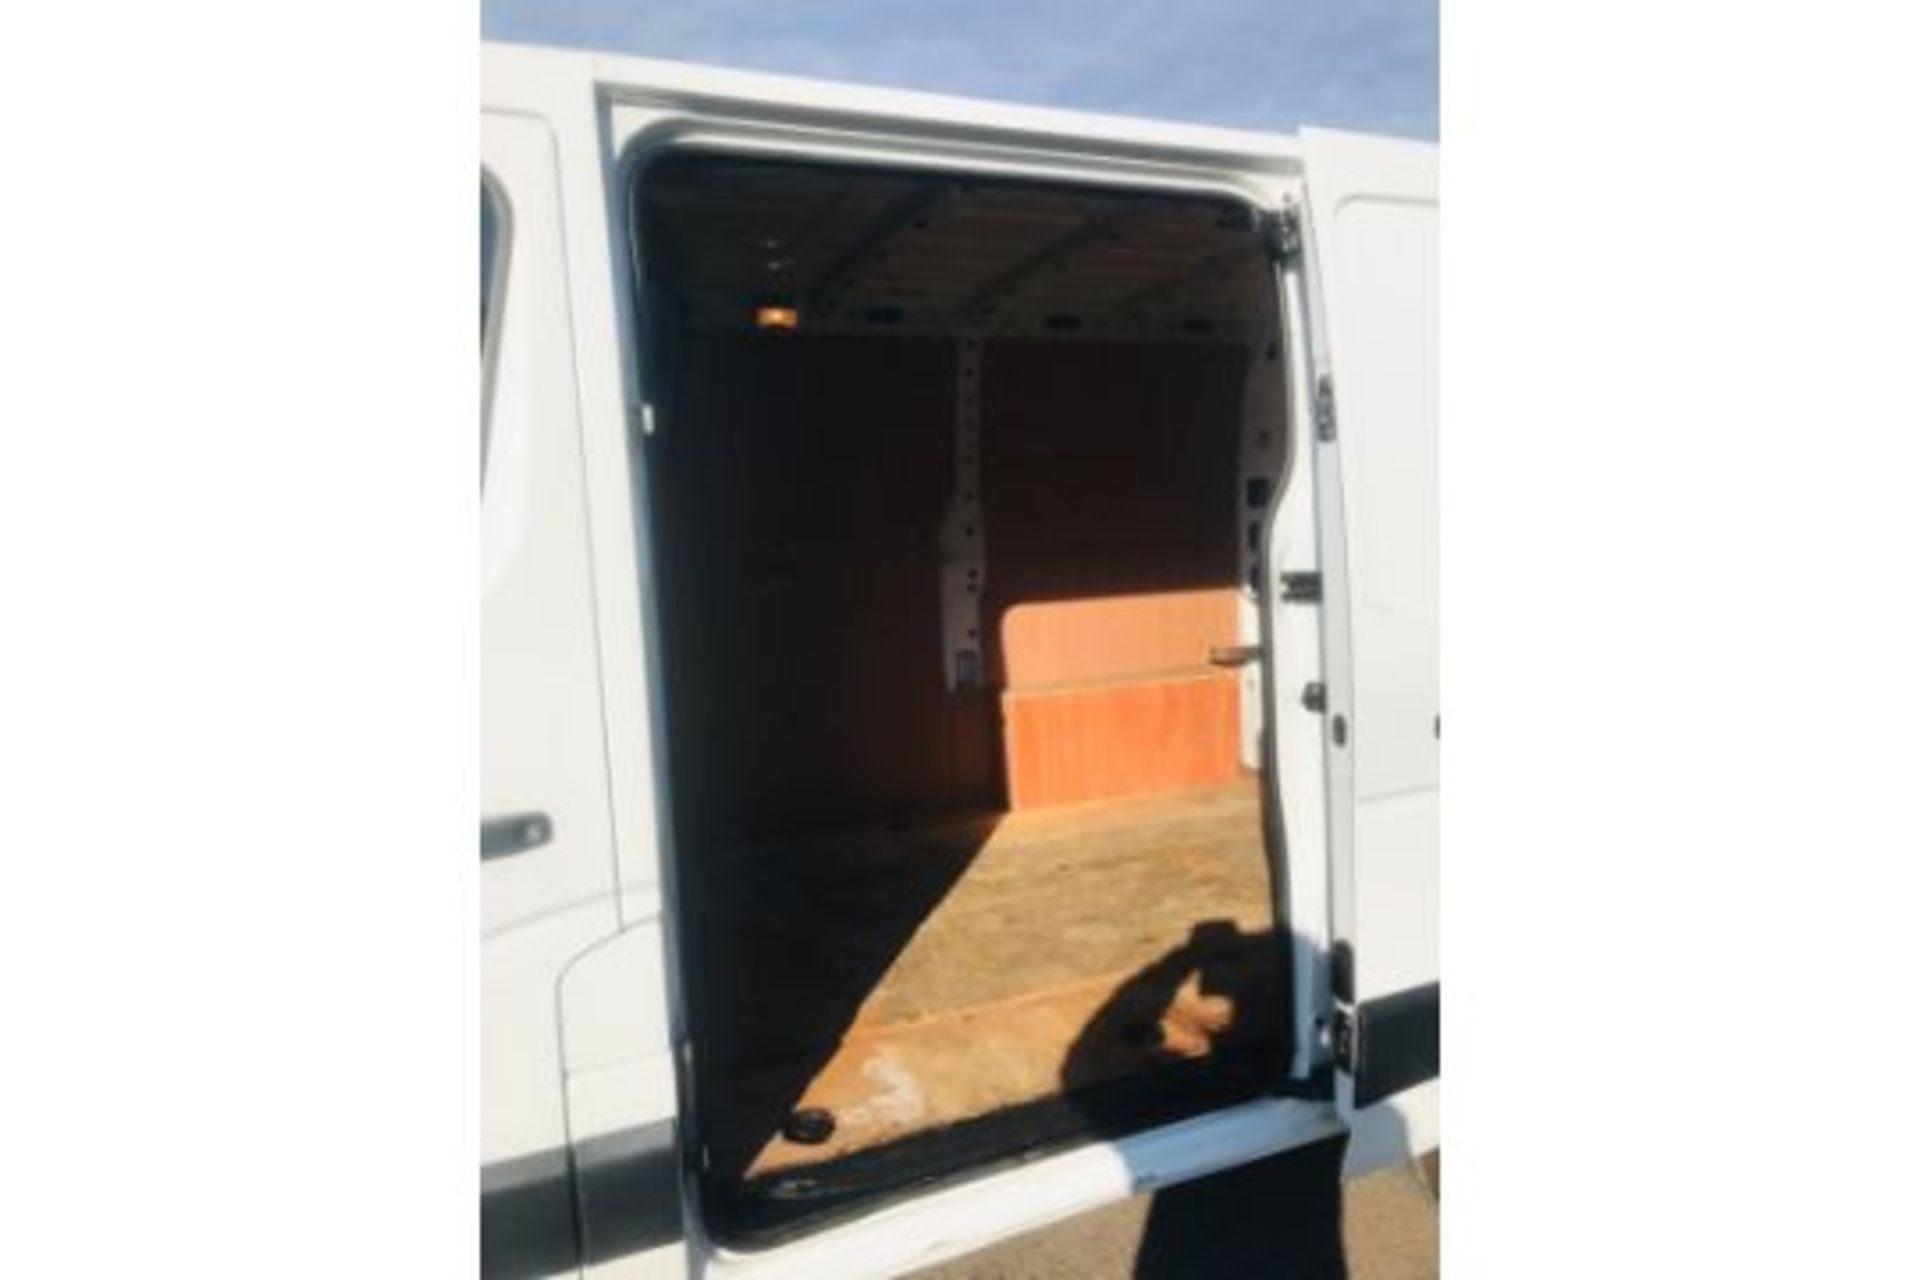 Vauxhall Movano F2800 2.3 CDTI - 2017 17 Reg - Air Con - 1 Keeper From New - Image 8 of 30